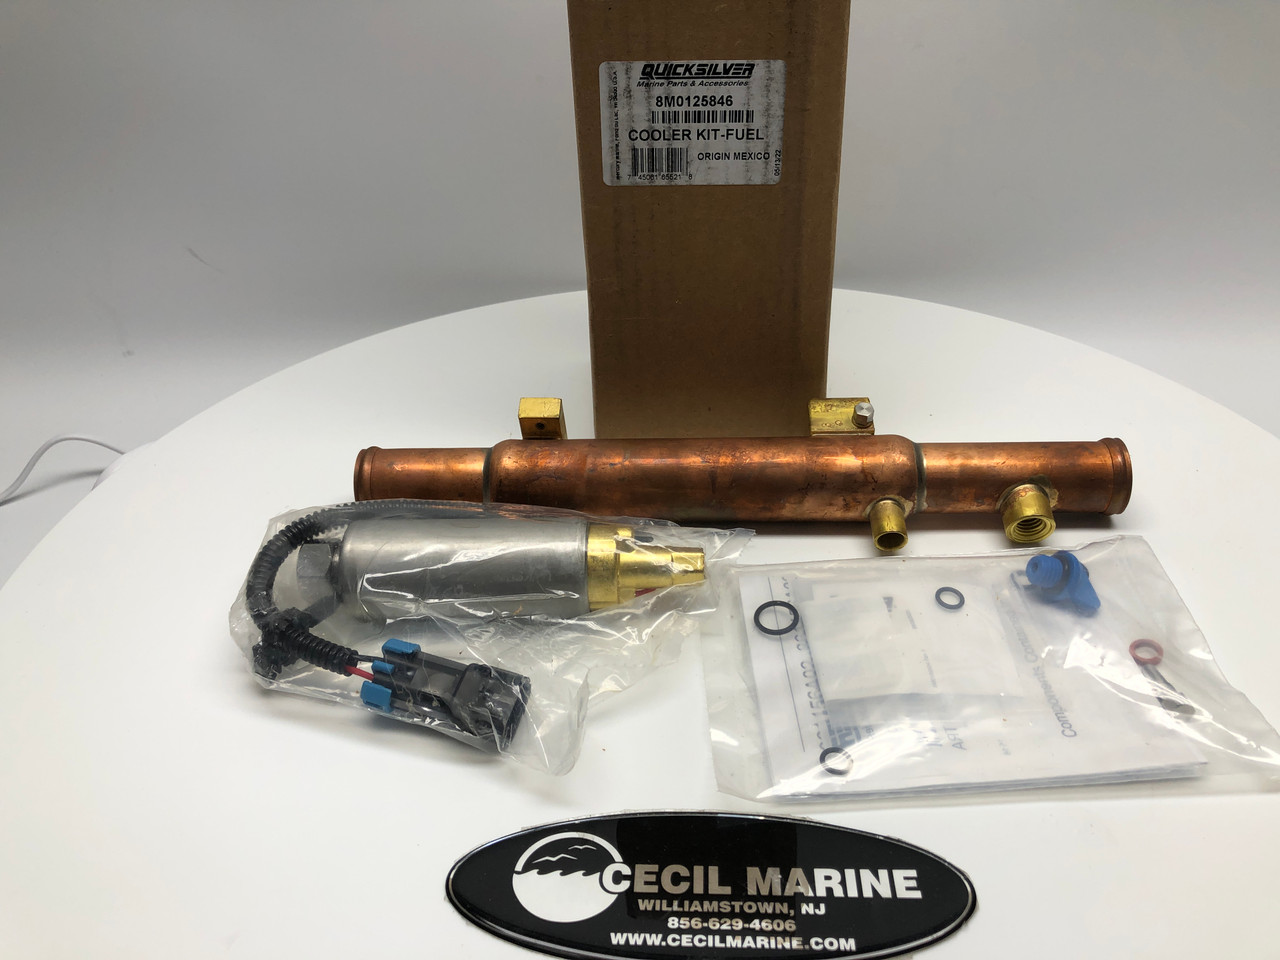 GENUINE MERCURY no tax* PUMP/COOLER KIT  *In Stock & Ready To Ship!